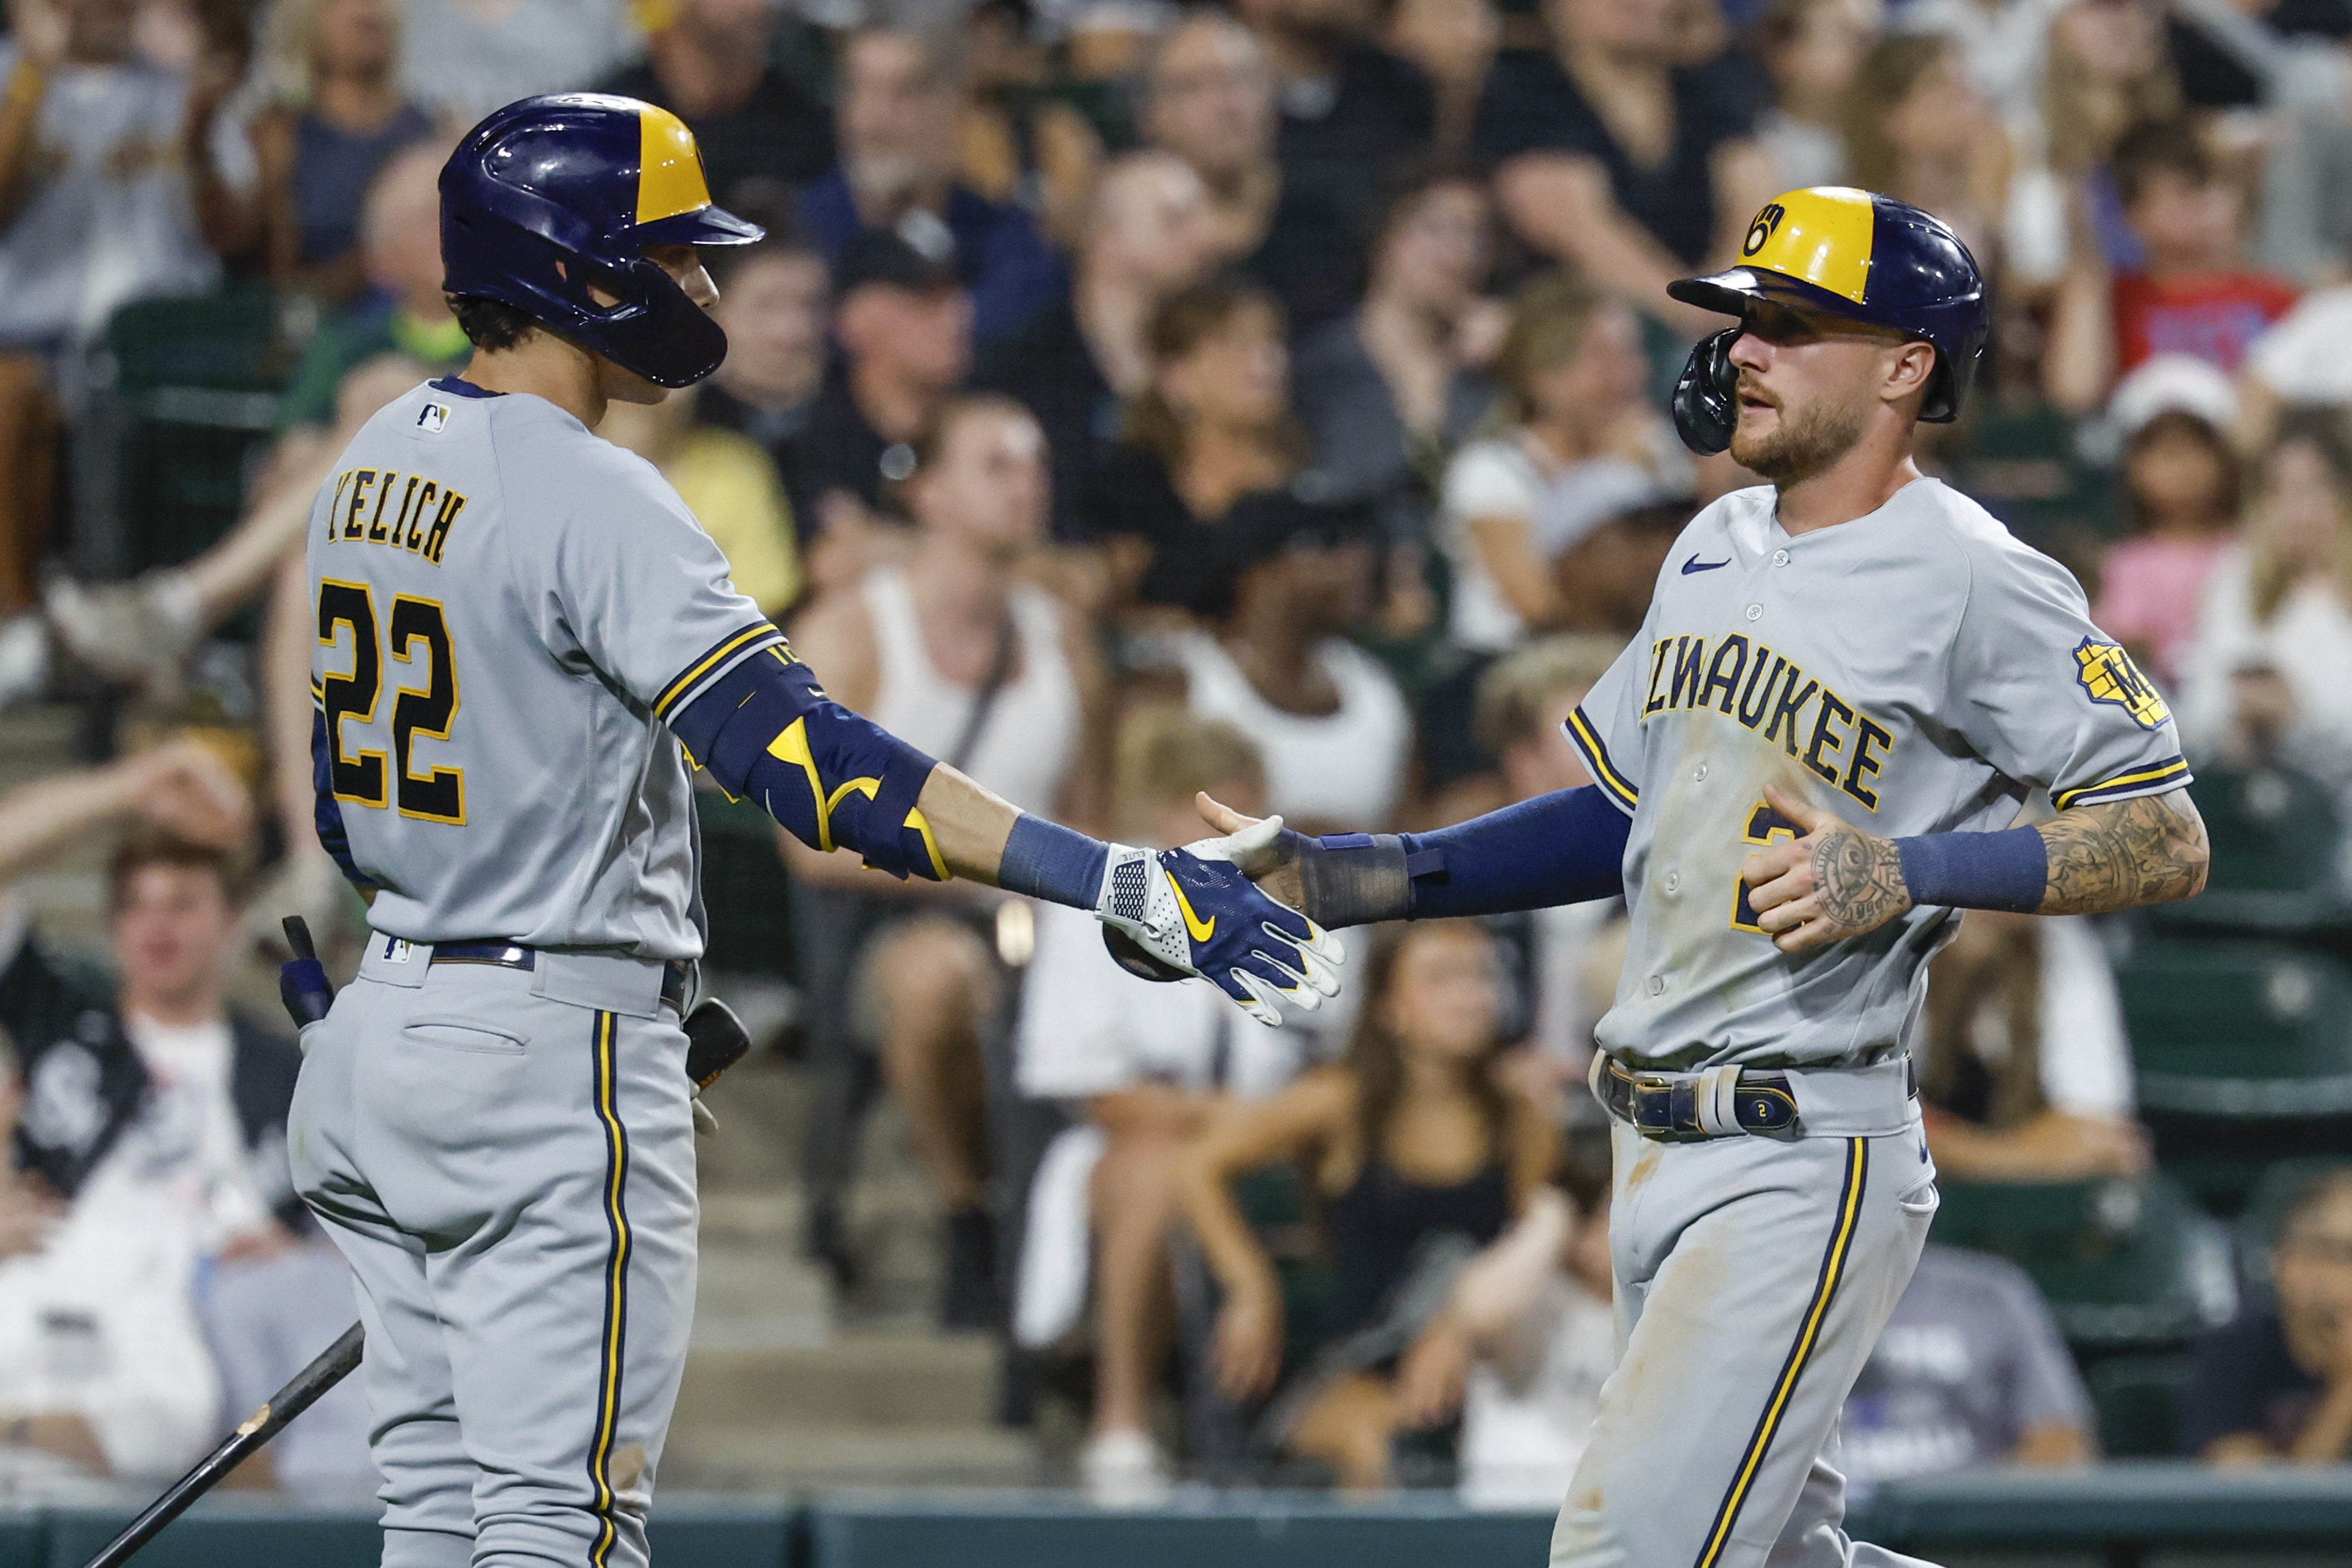 Canha double in 10th lifts Brewers over White Sox 7-6 as Milwaukee